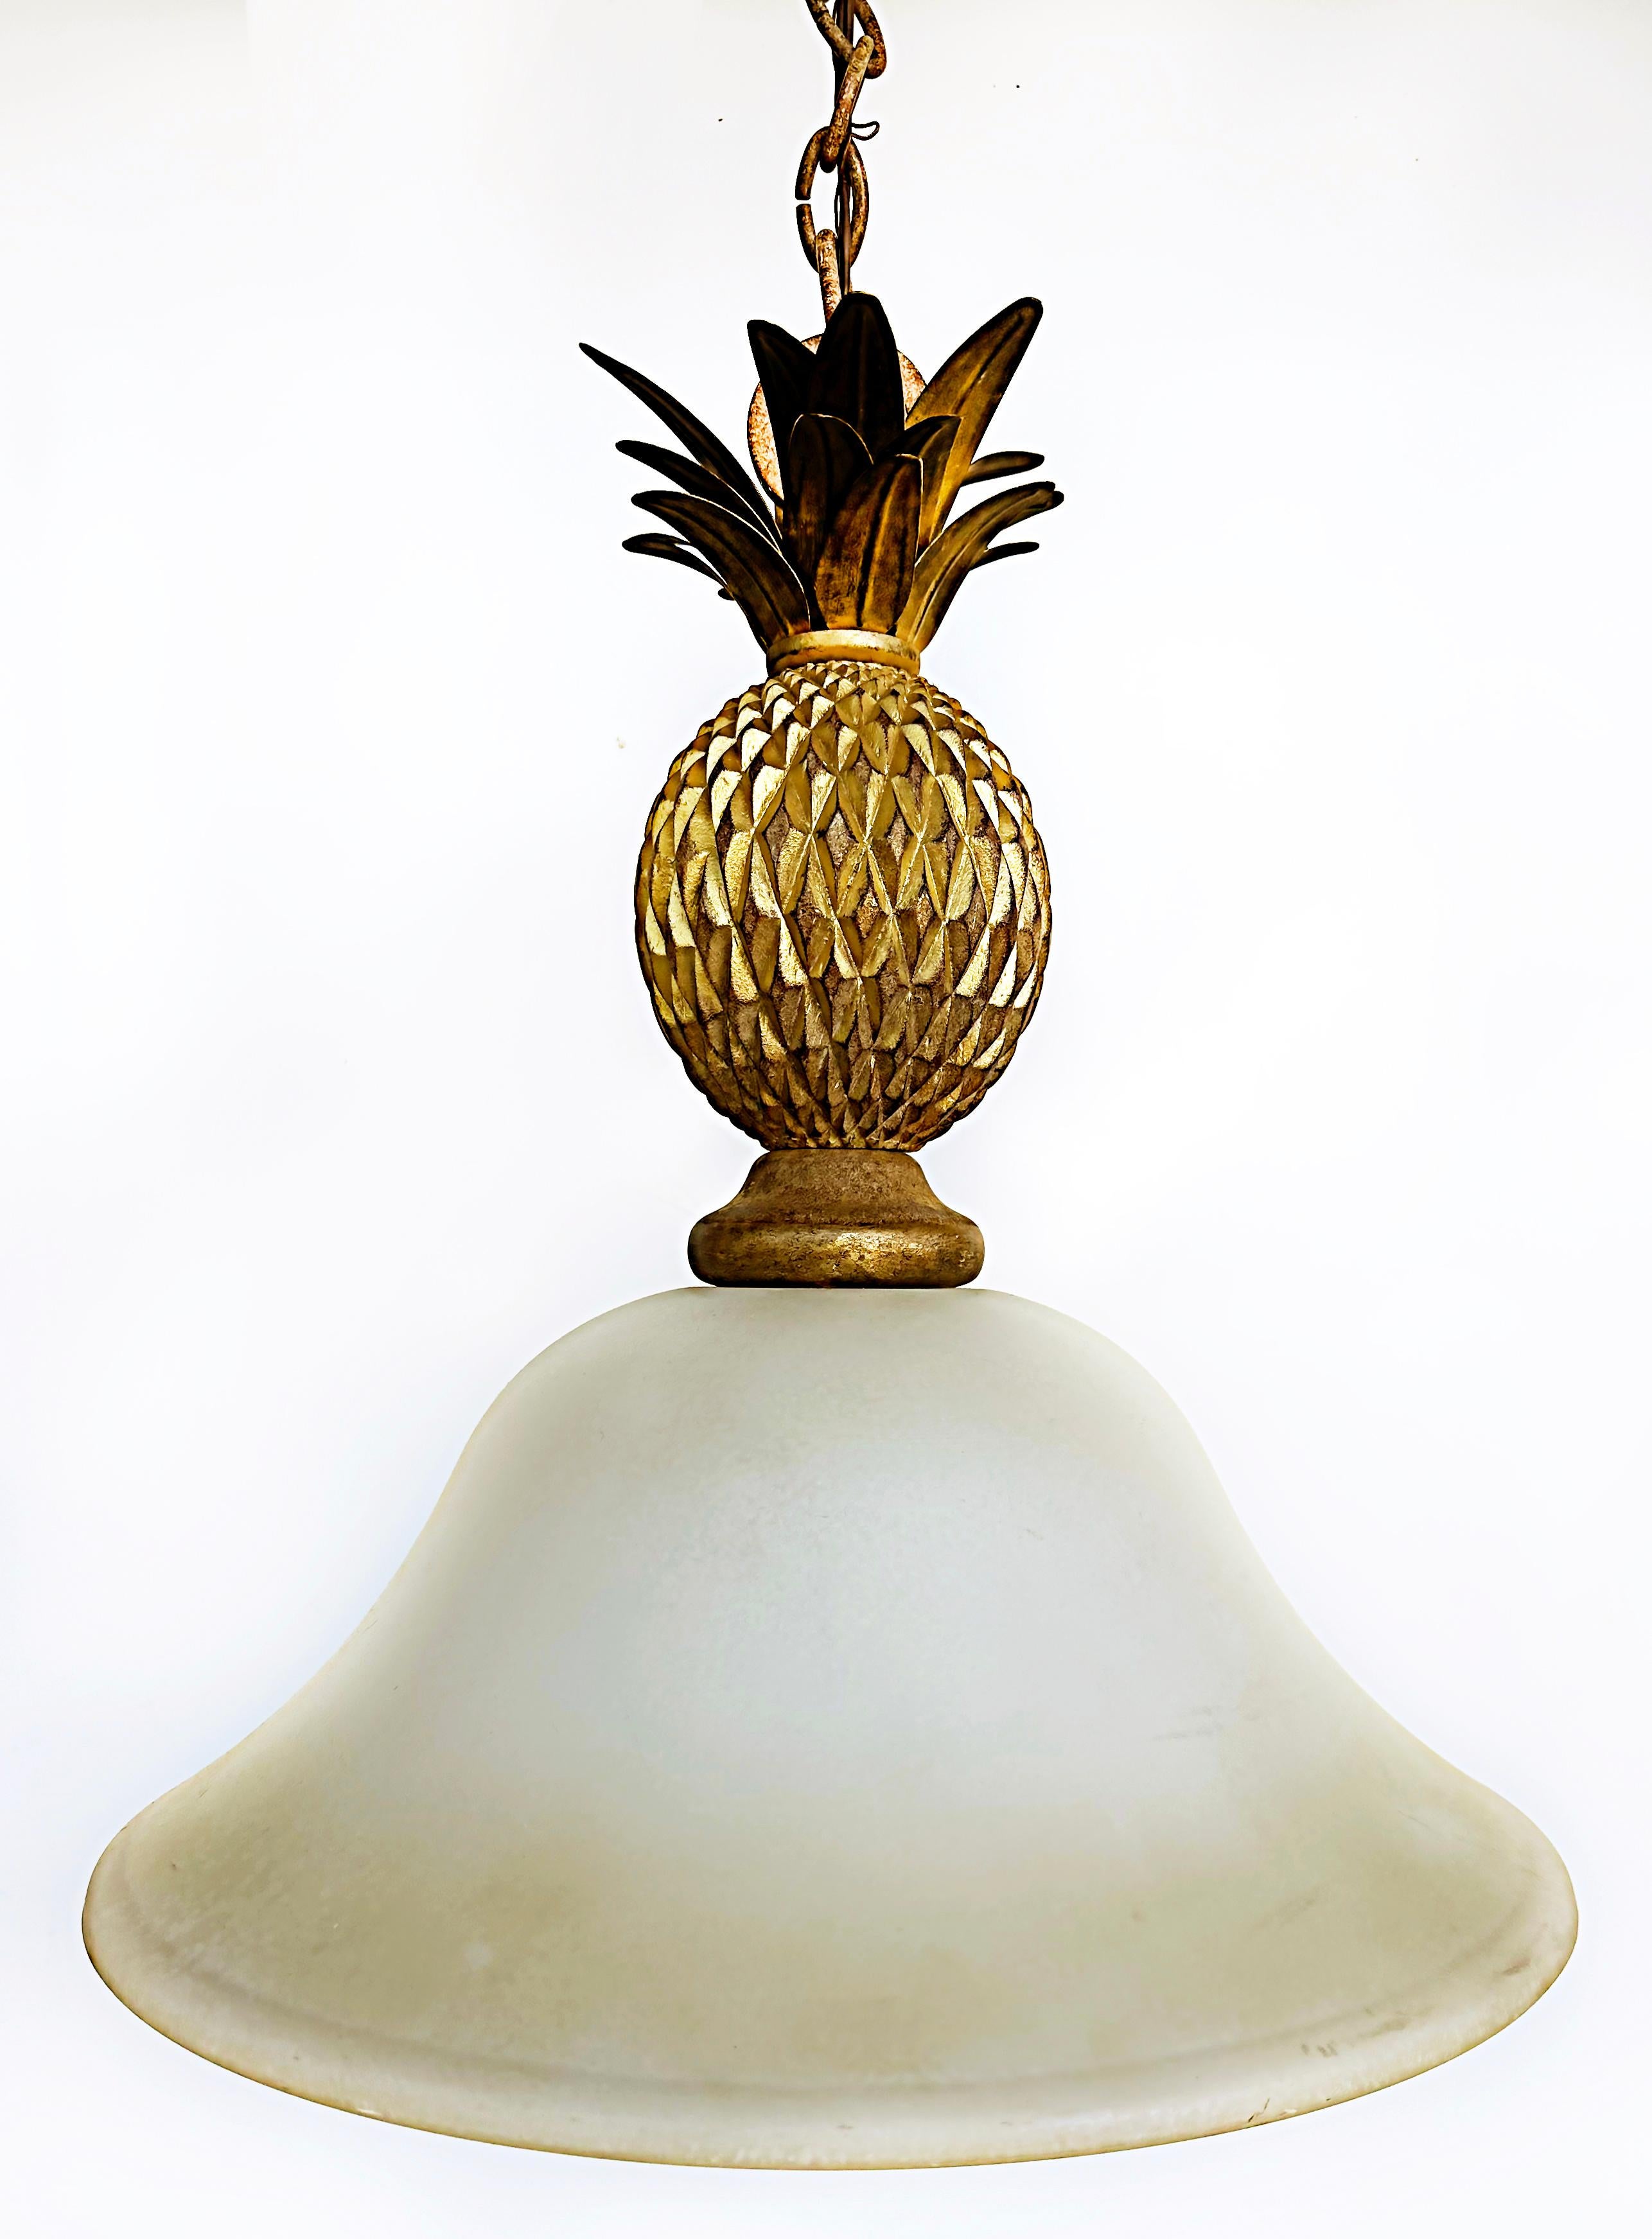 Gilt metal wood pineapple glass pendant ceiling fixture with chain.

Offered for sale is a gilt metal and carved wood pineapple pendant light ceiling fixture with a frosted glass shade. The ceiling fixture is supported with a chain that can be